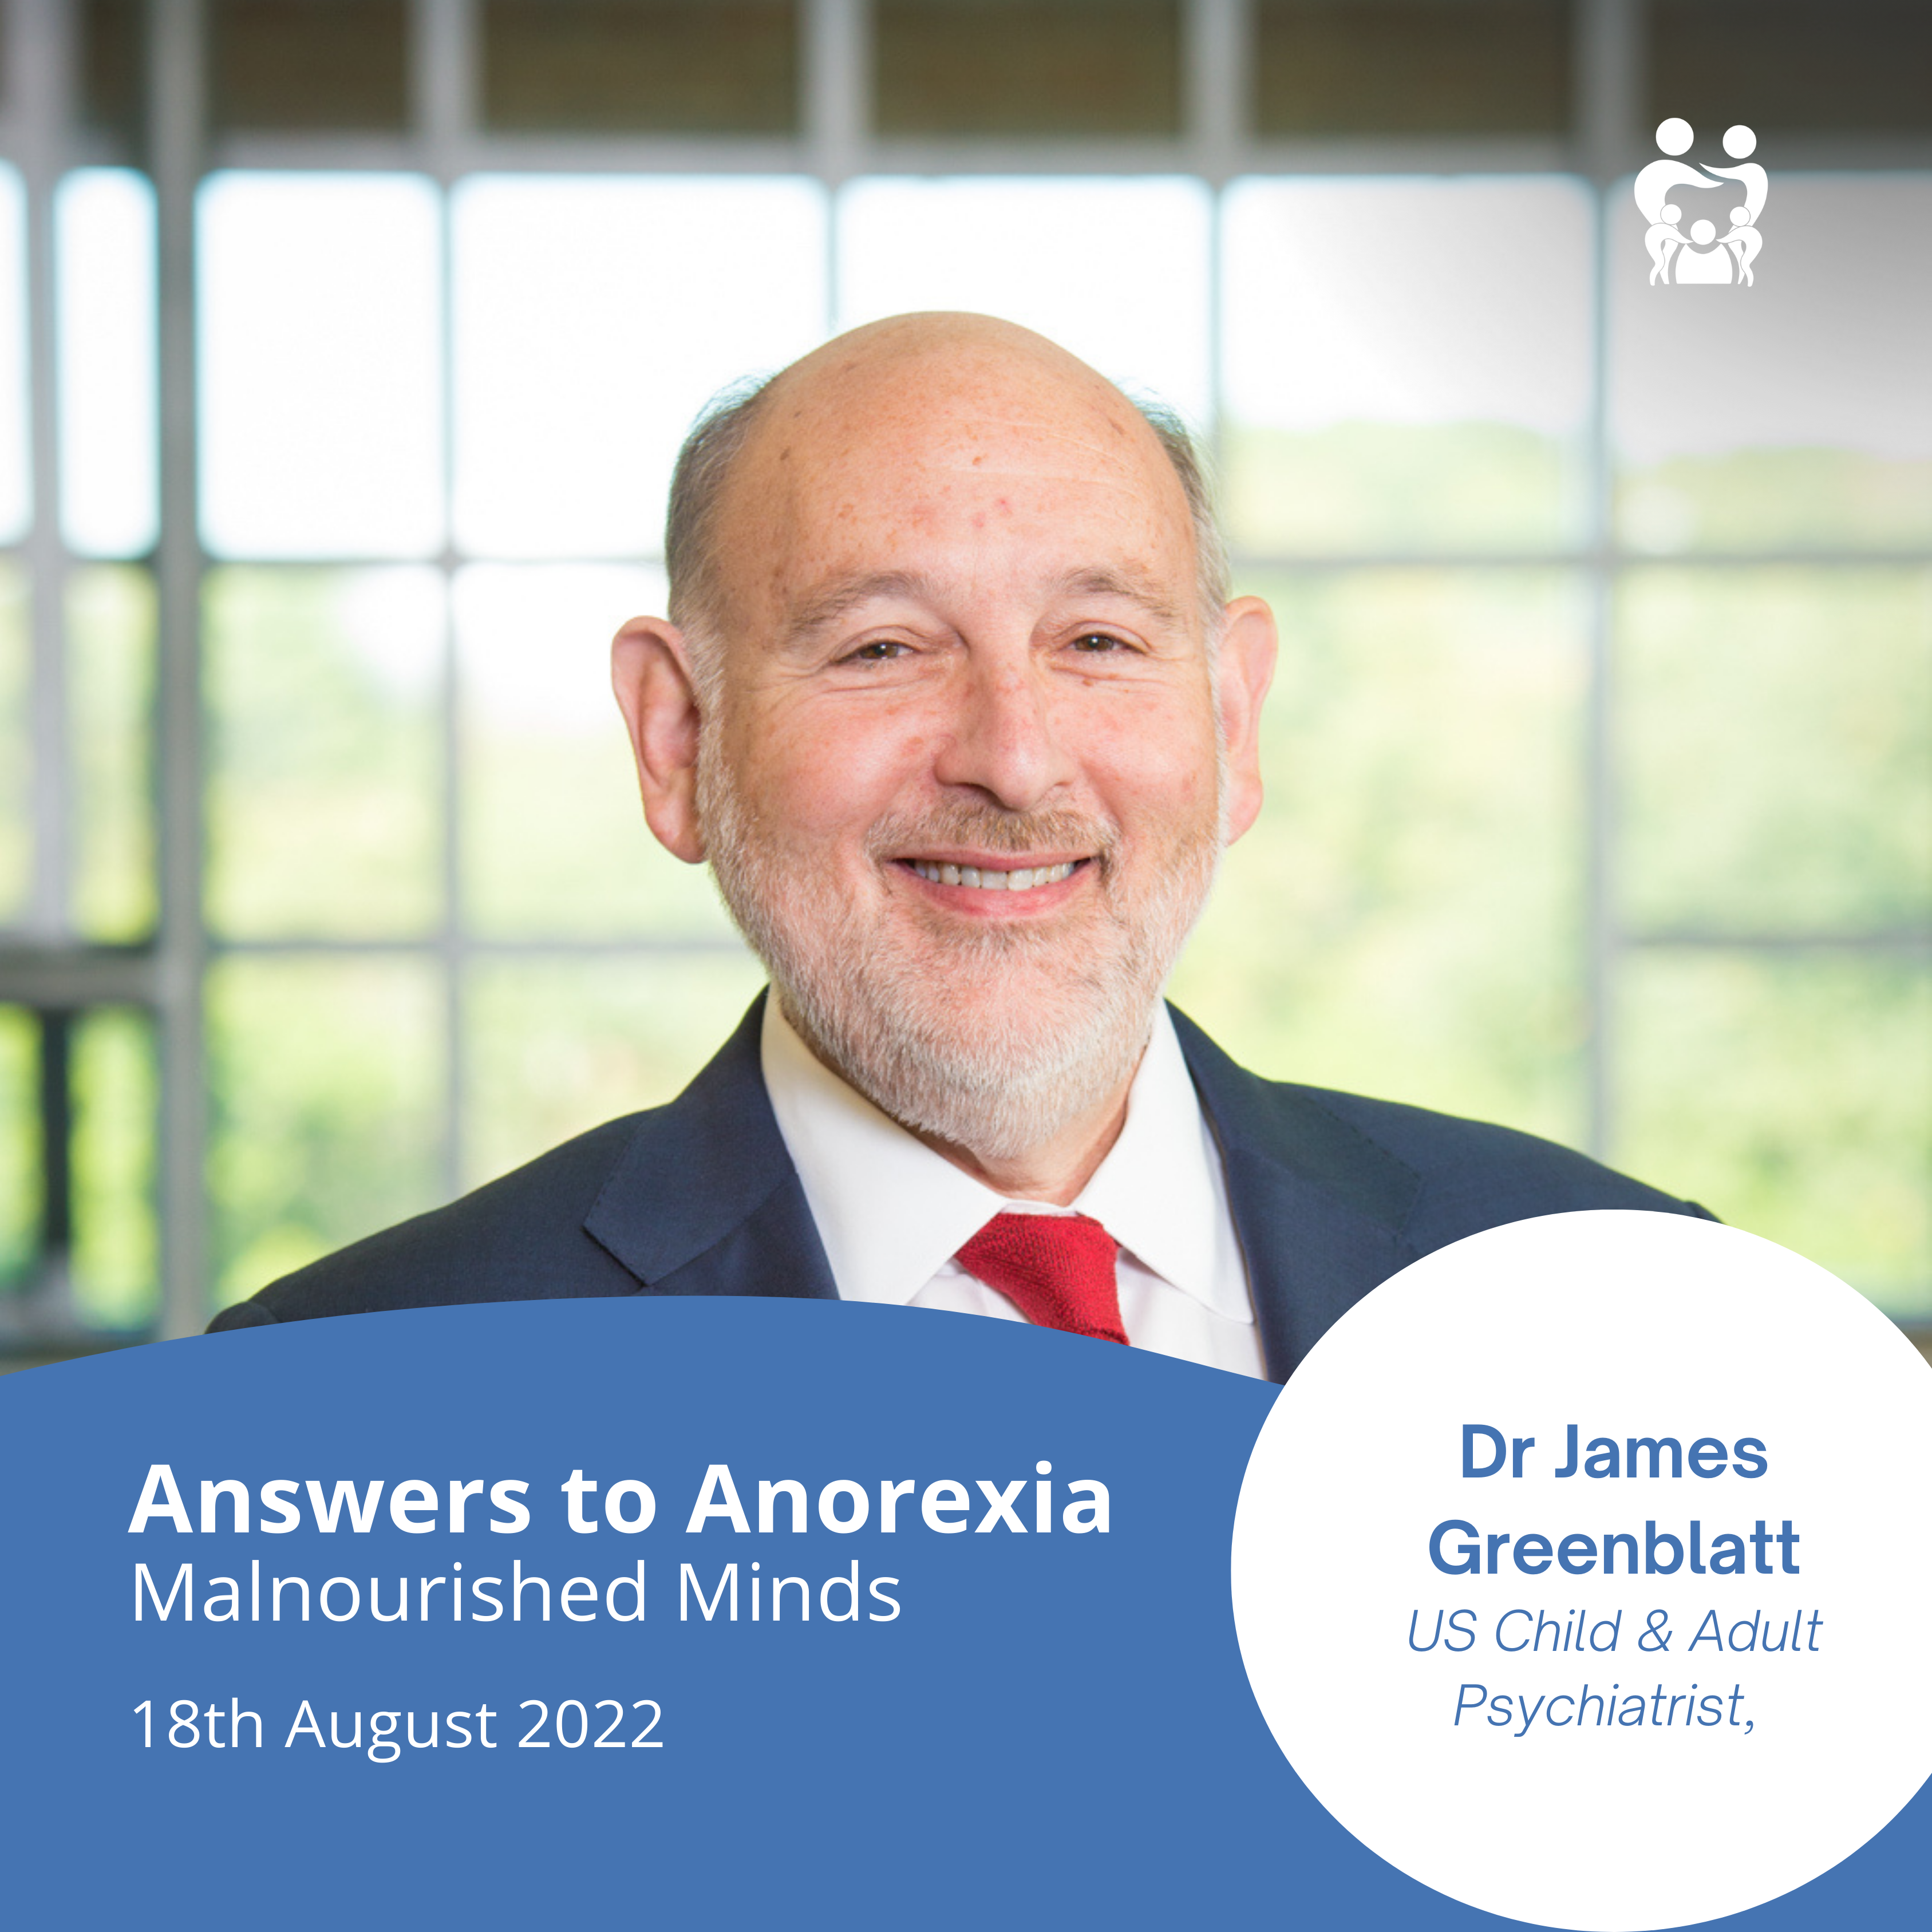 Answers to Anorexia - Malnourished Minds by Dr James Greenblatt 9 July 2022